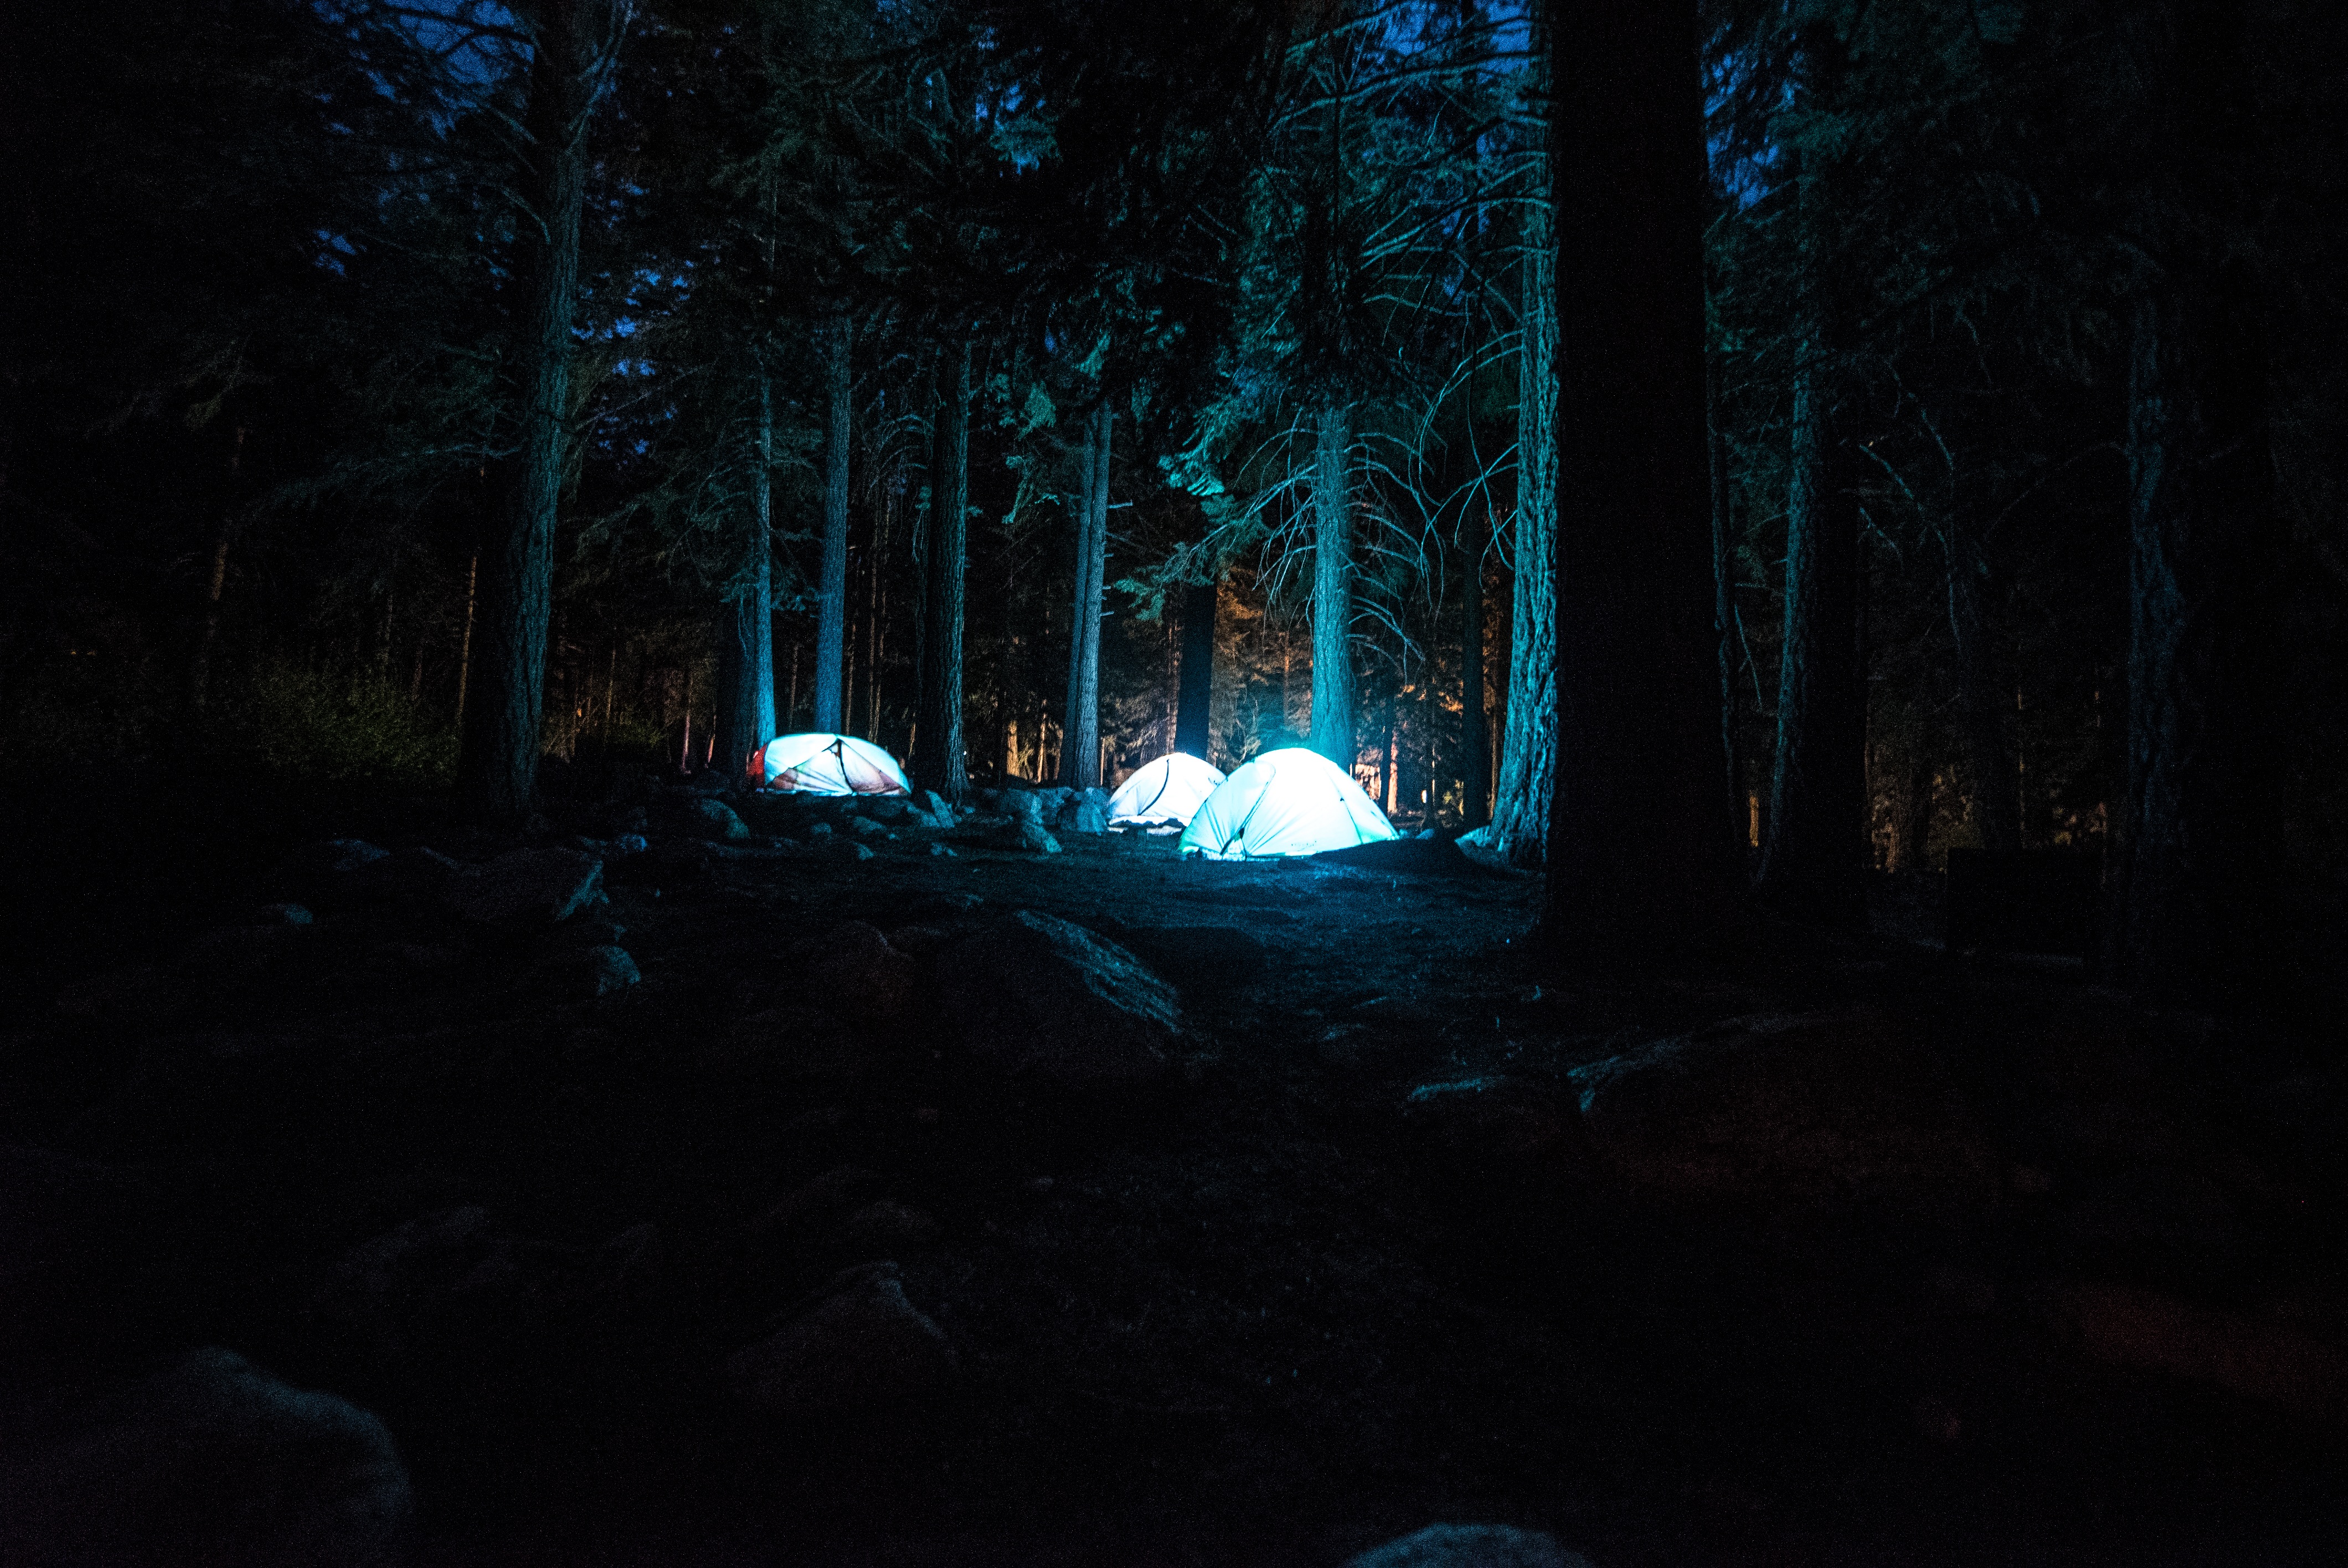 Camping in tents in the night forest